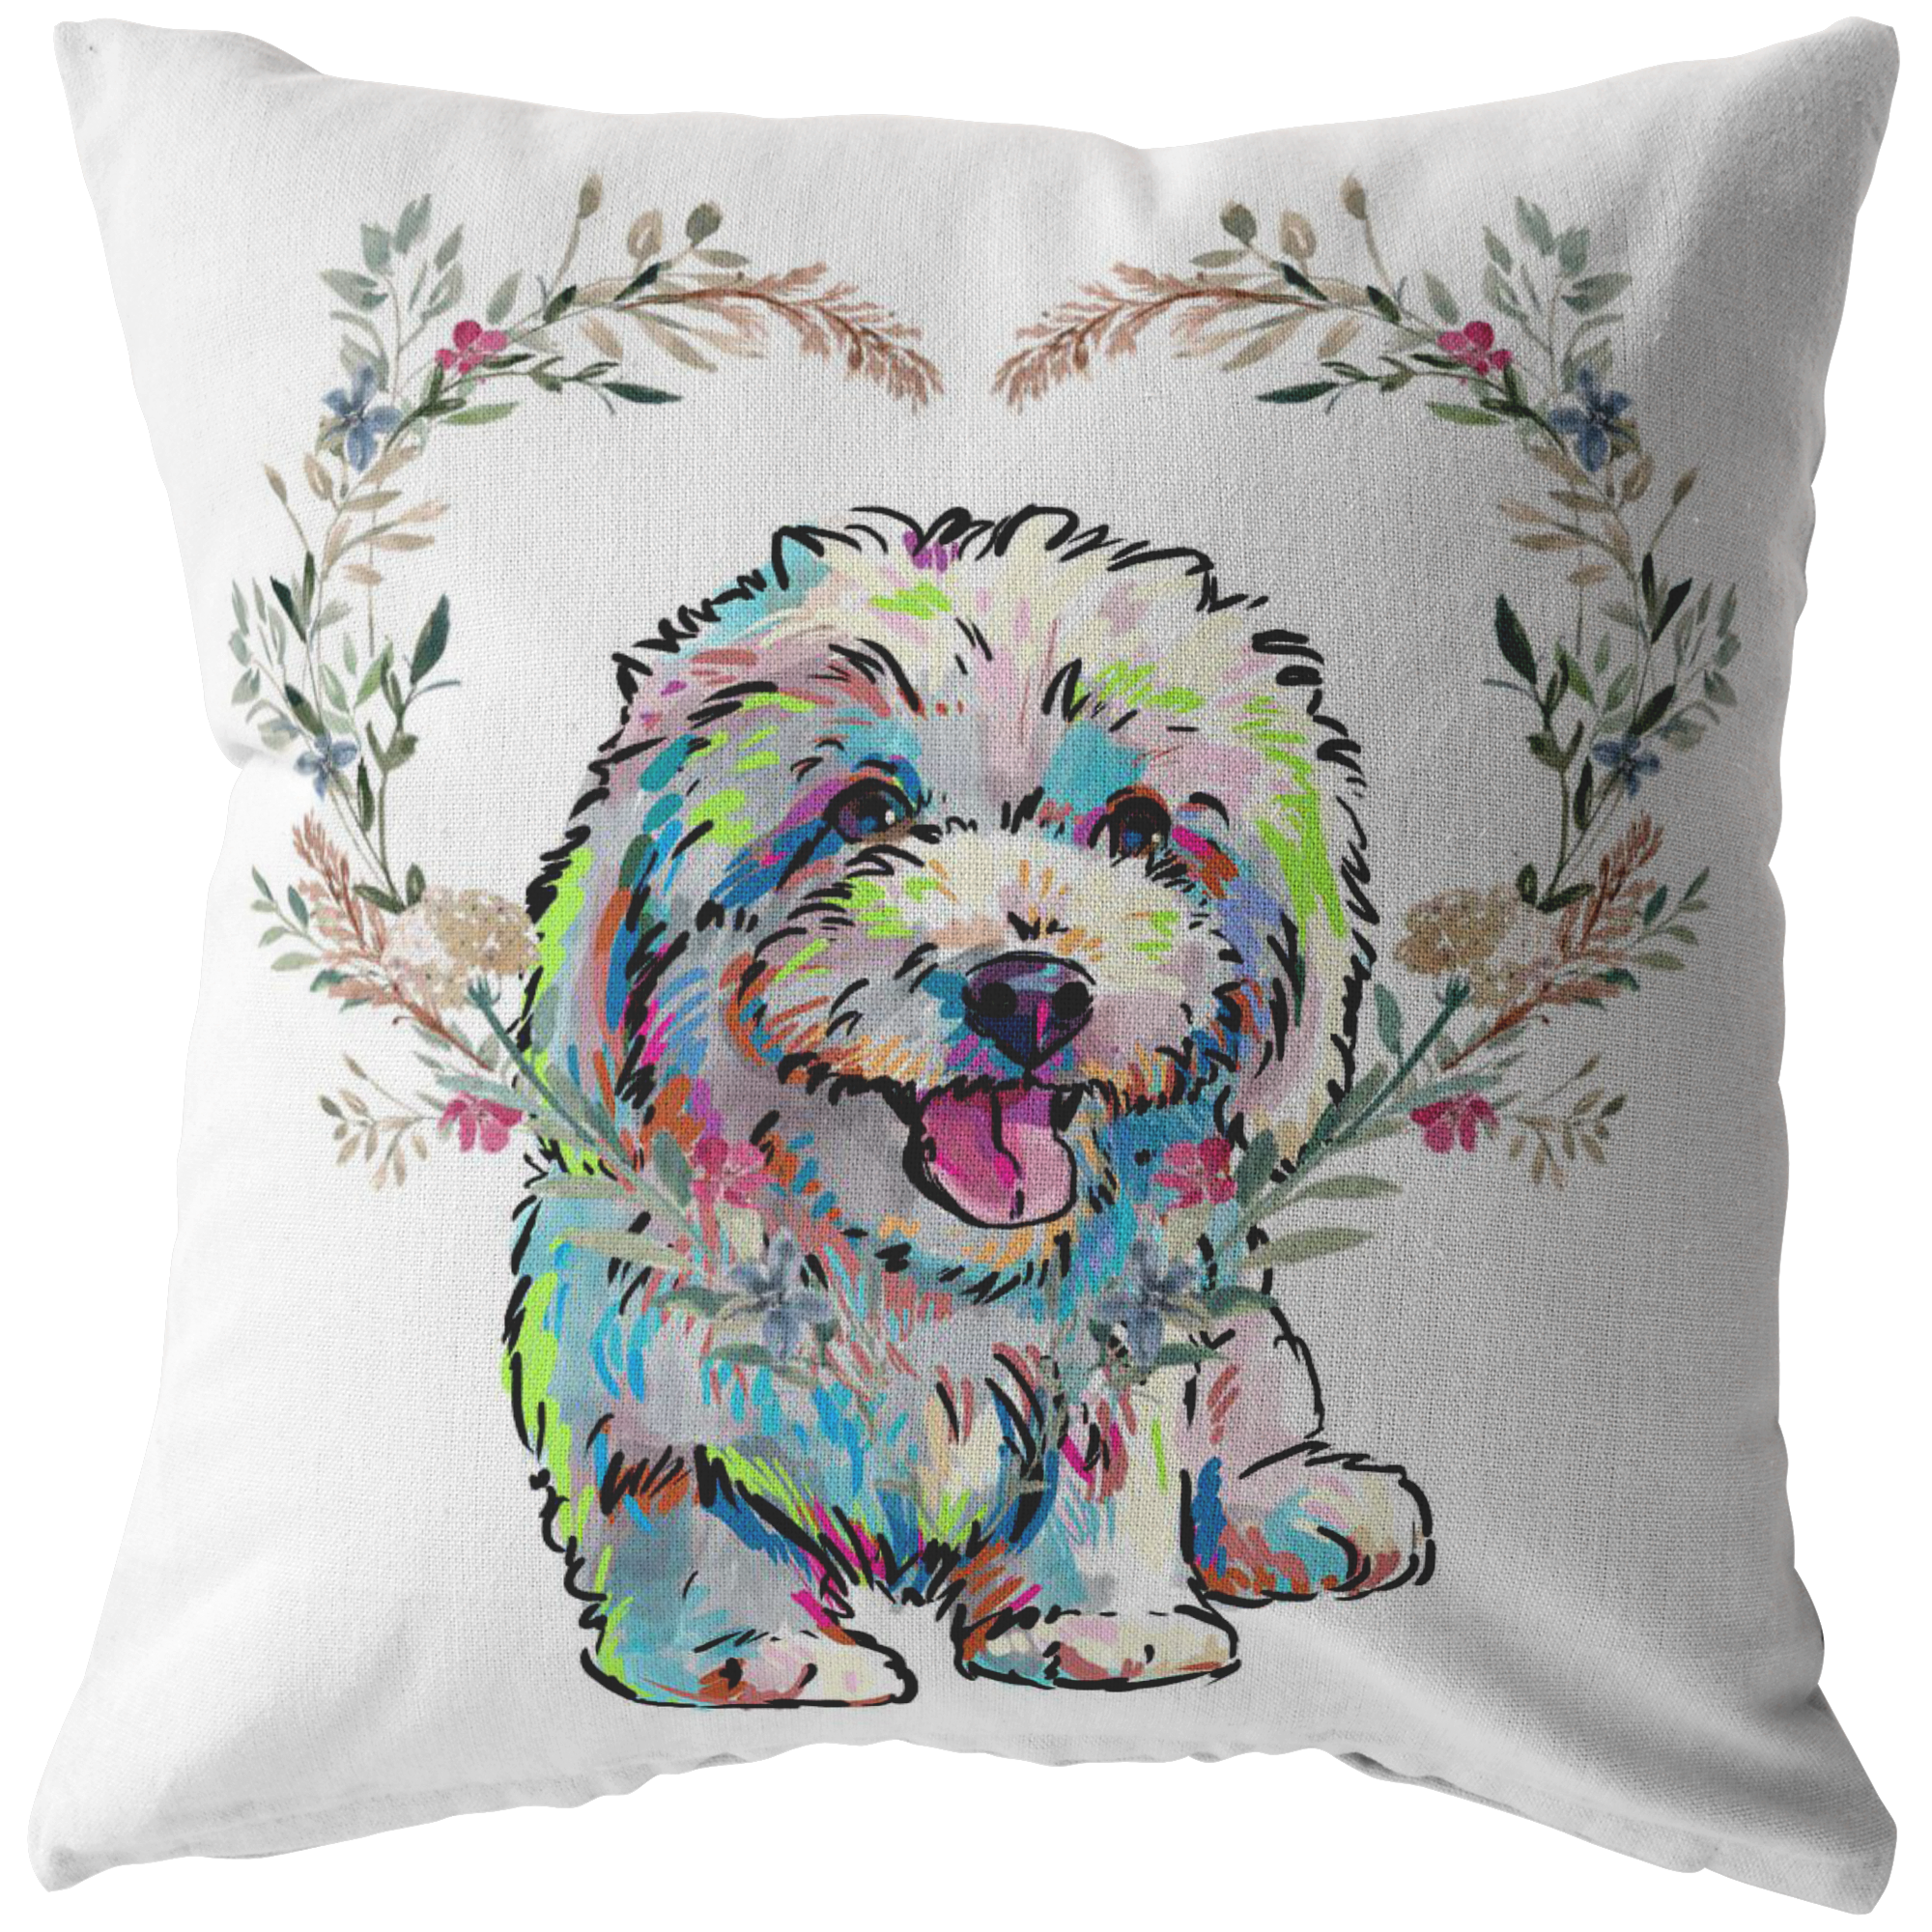 Bichon Frise Pillow with Heart Wreath